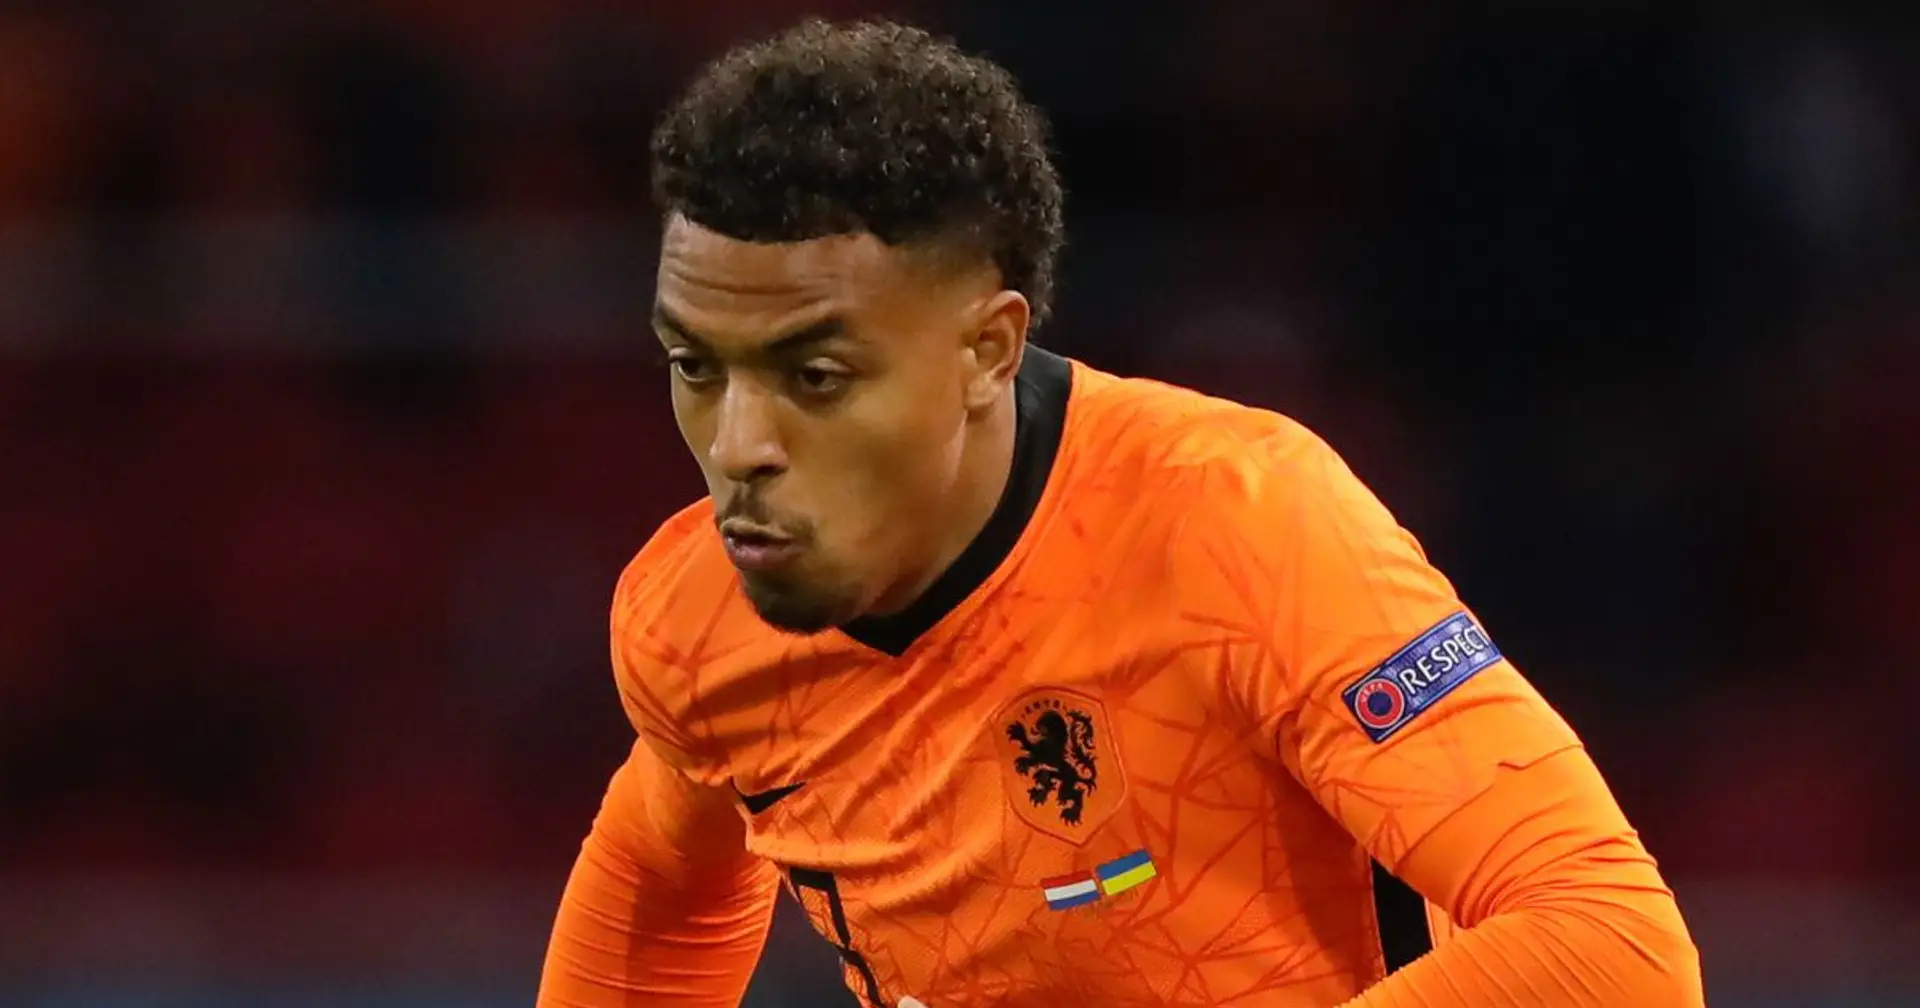 'It's the logical path': LFC fan gives 2 reasons explaining whether Donyell Malen will choose Dortmund or Liverpool